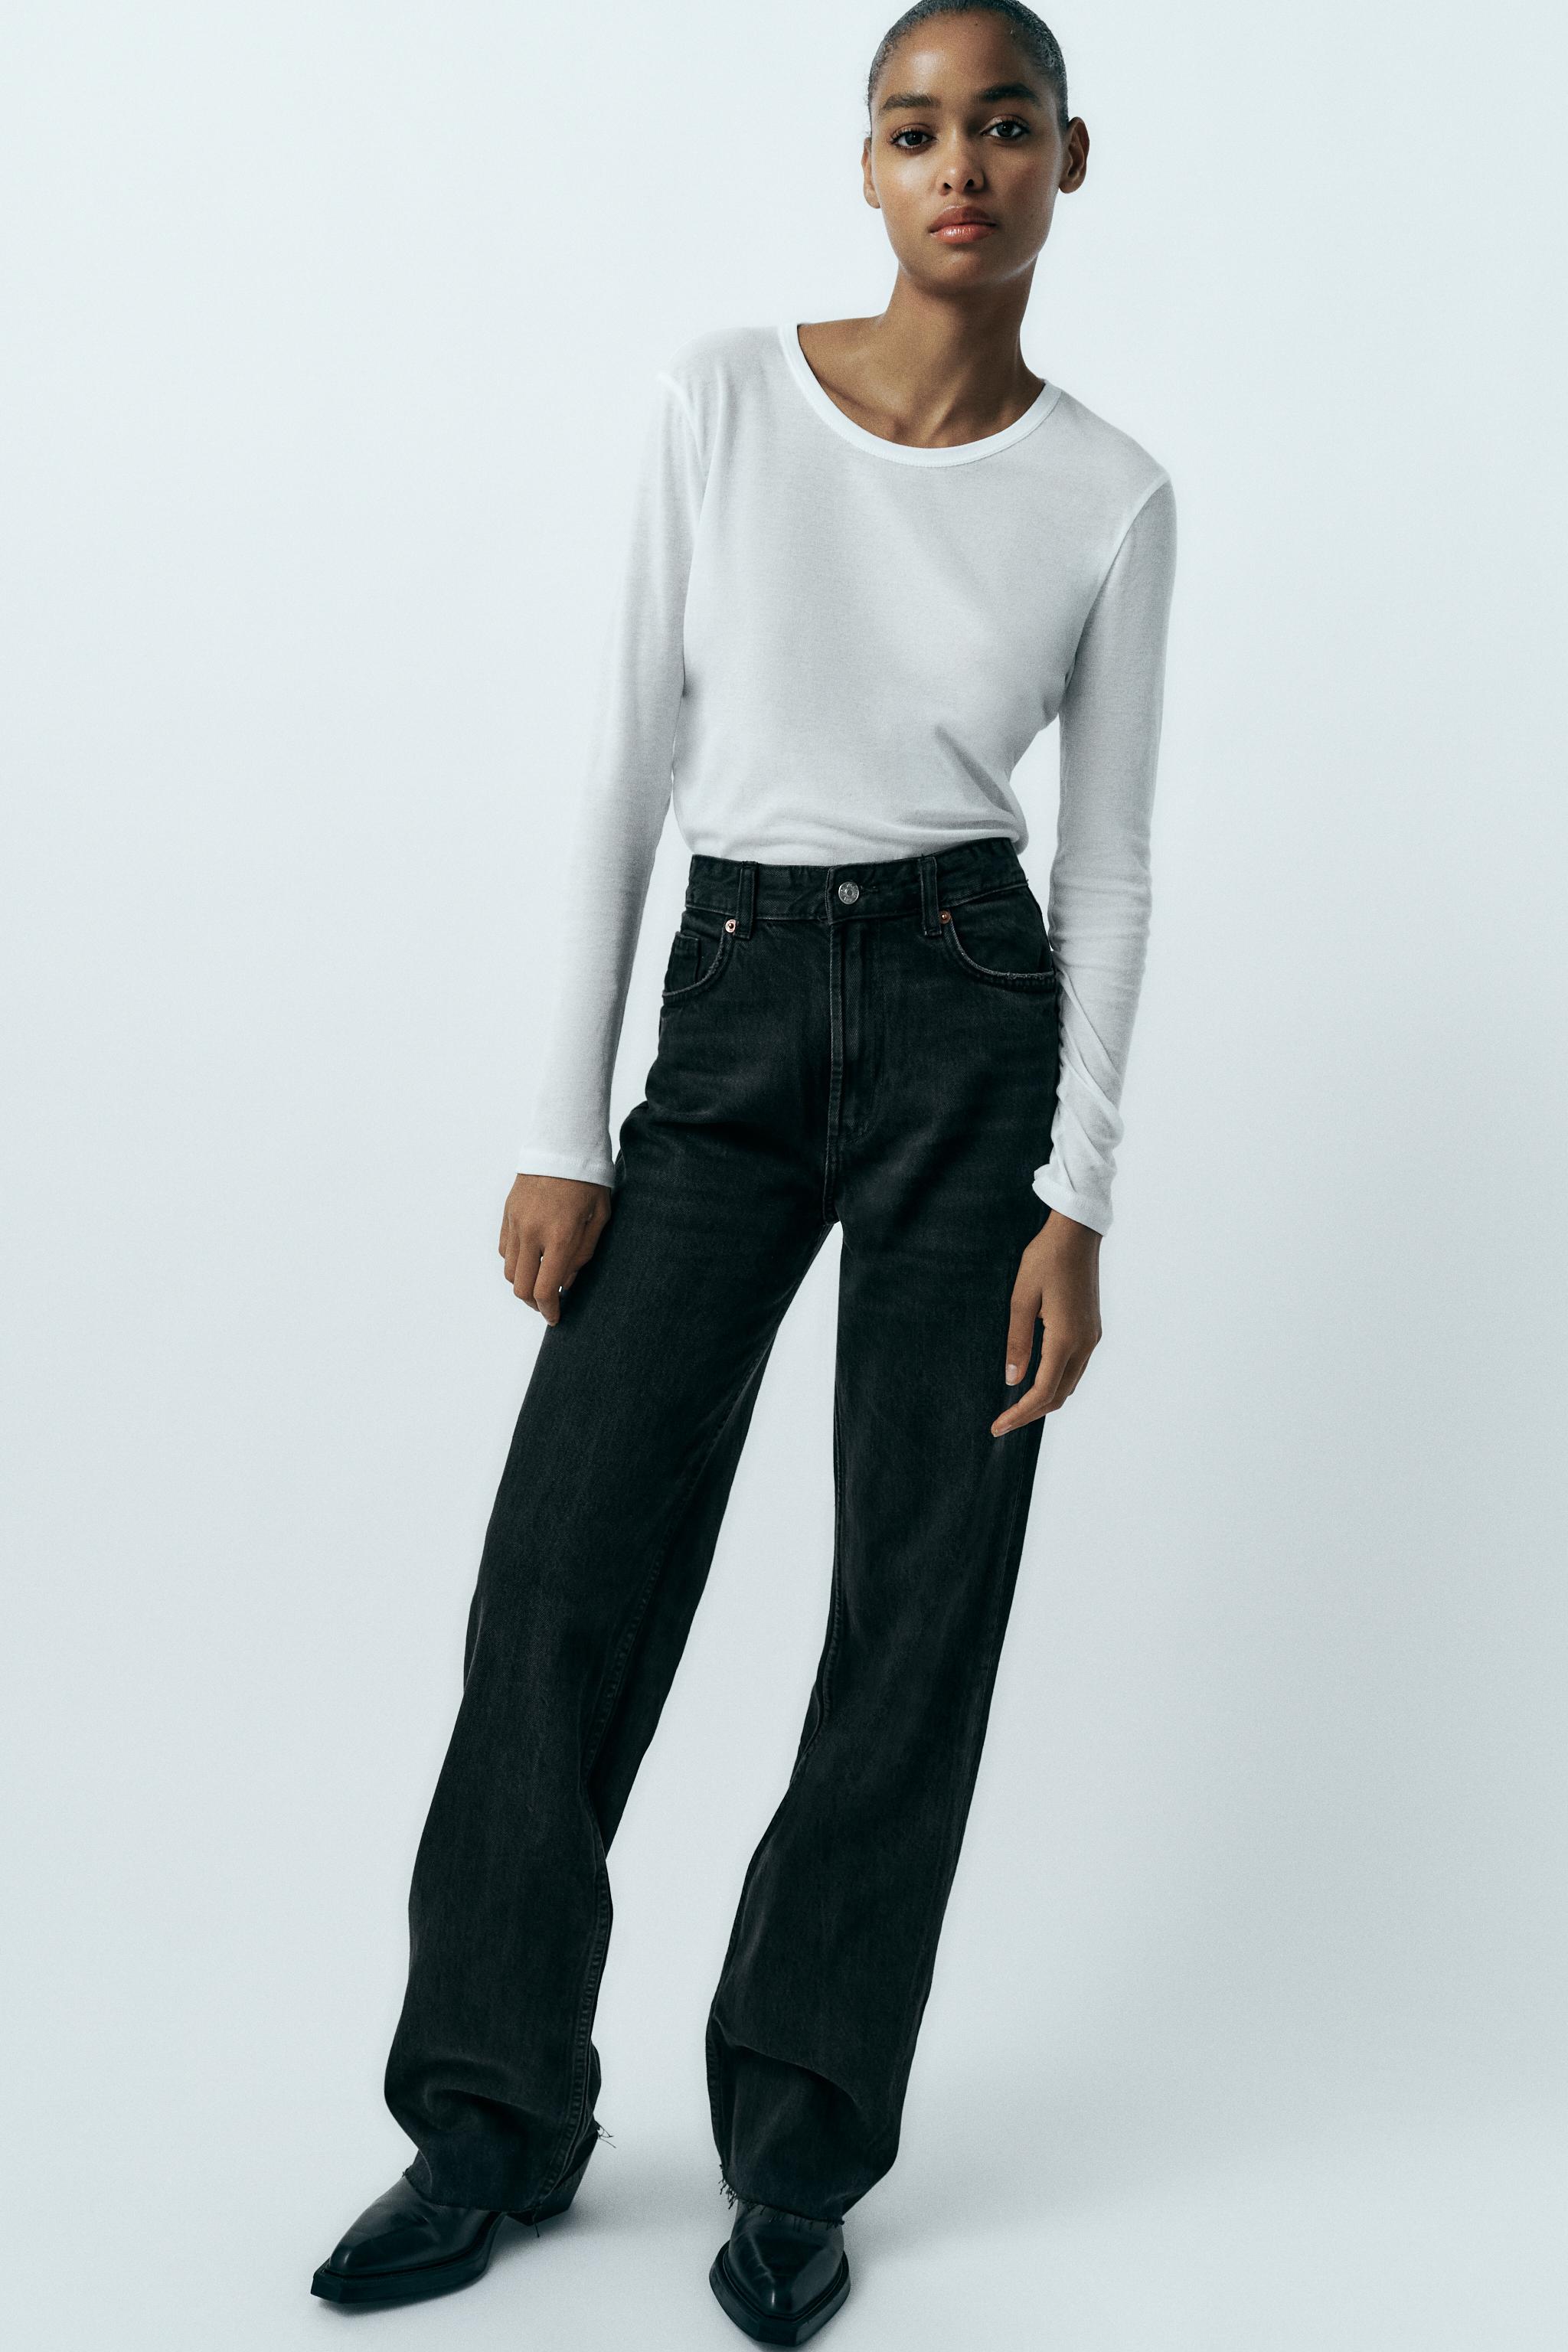 ✨🤍Elevate your style with the Zara High-Waist Pants! Crafted with pre